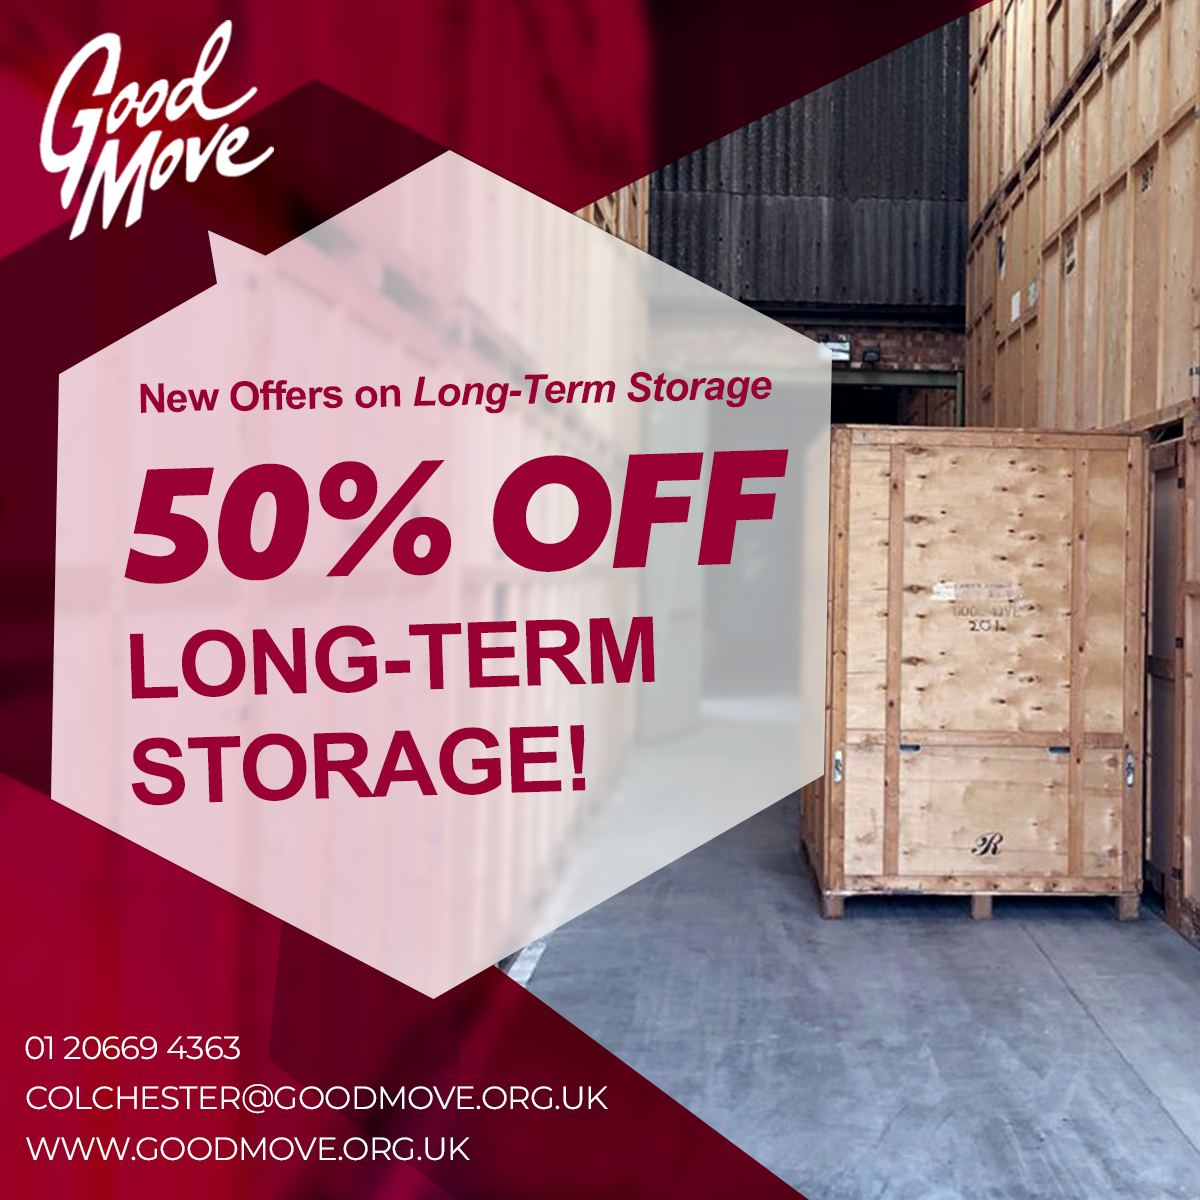 Long-Term Storage Offers: 50% off, First Month FREE & Complimentary Collection